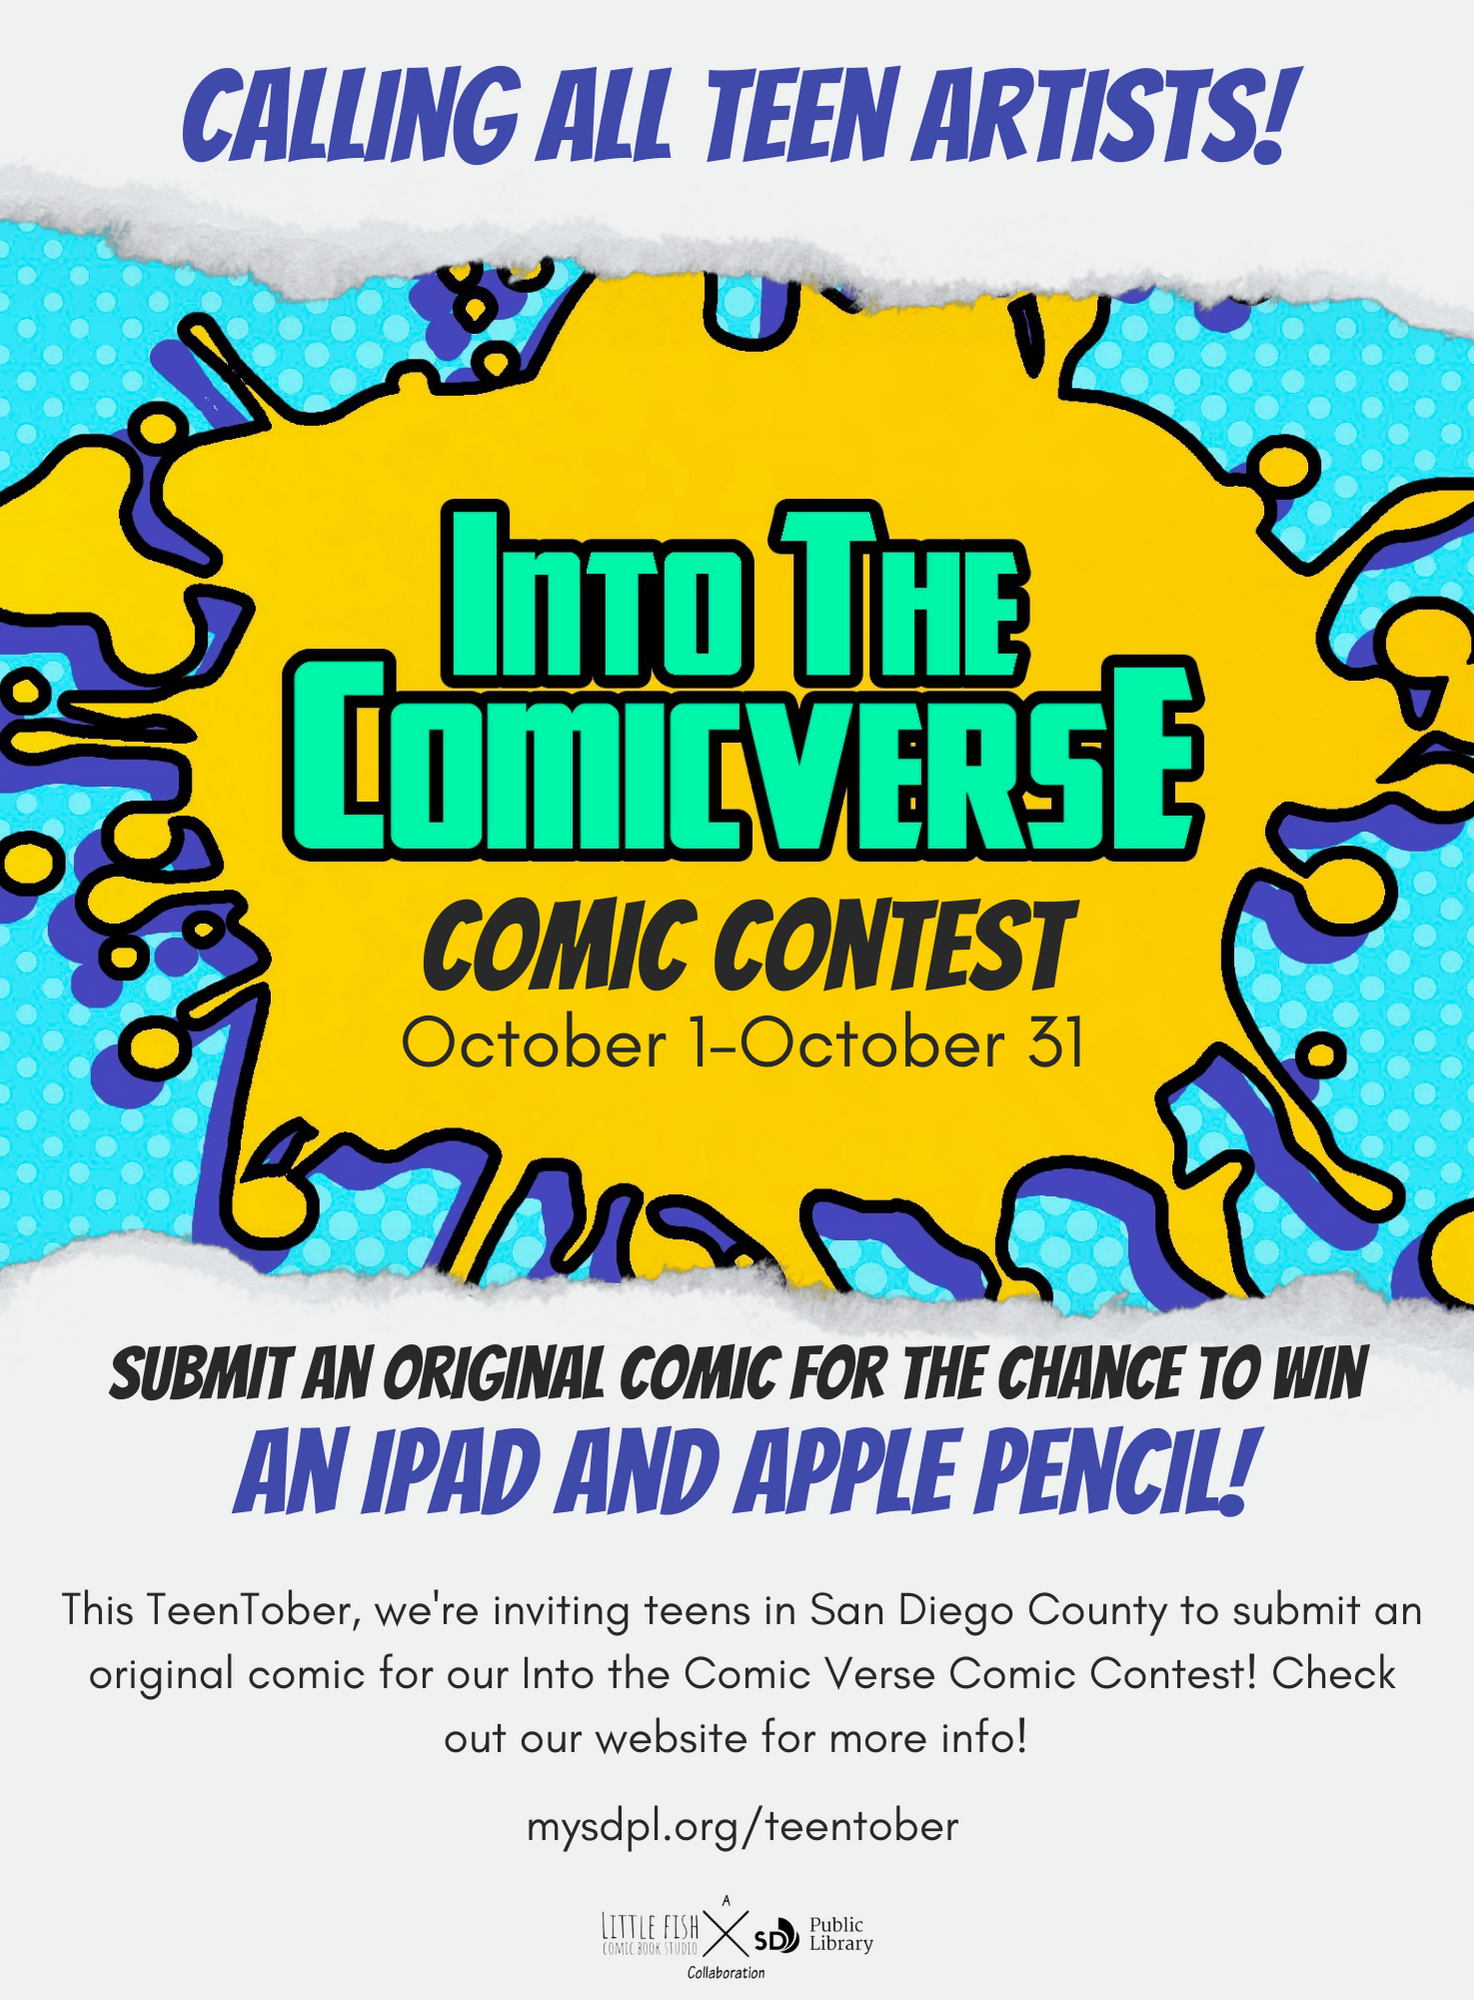 Yellow blob on cyan background. Top of graphic says "Calling All Teen Artists!" Center of Flyer says "Into the Comic Verse Comic Contest: October 1-October 31. 